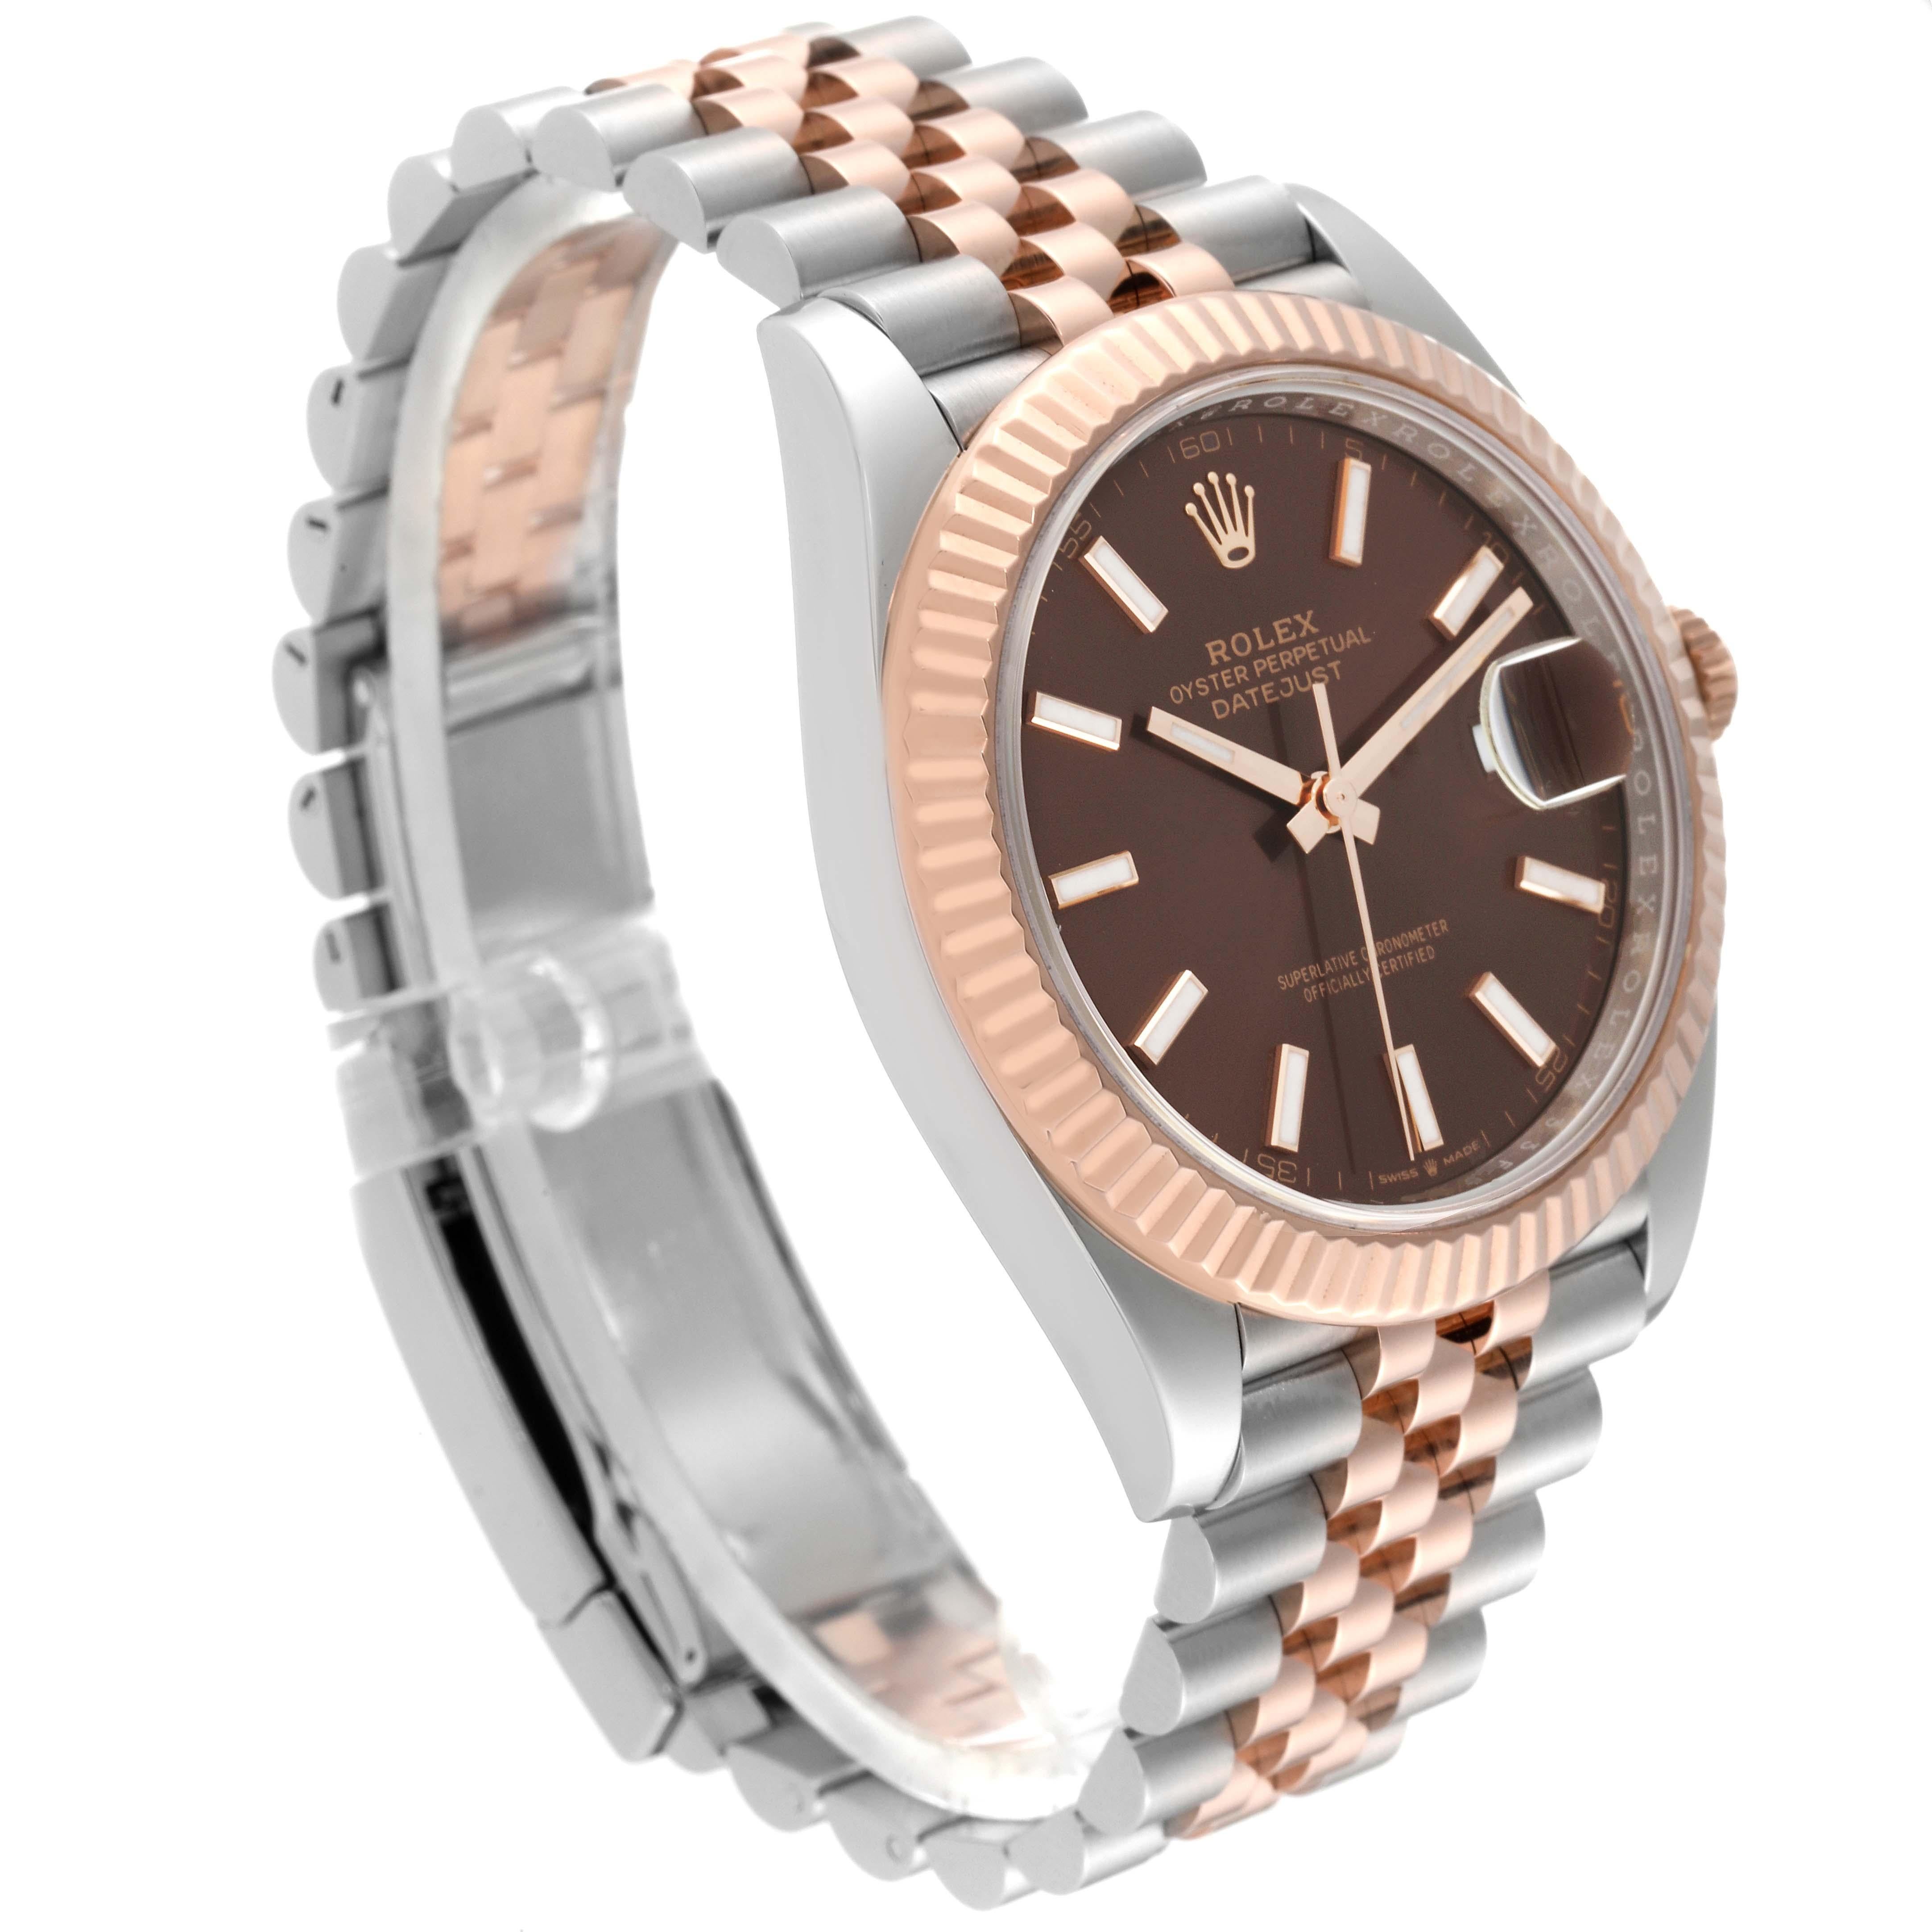 Rolex Datejust 41 Steel Rose Gold Chocolate Dial Mens Watch 126331 For Sale 2